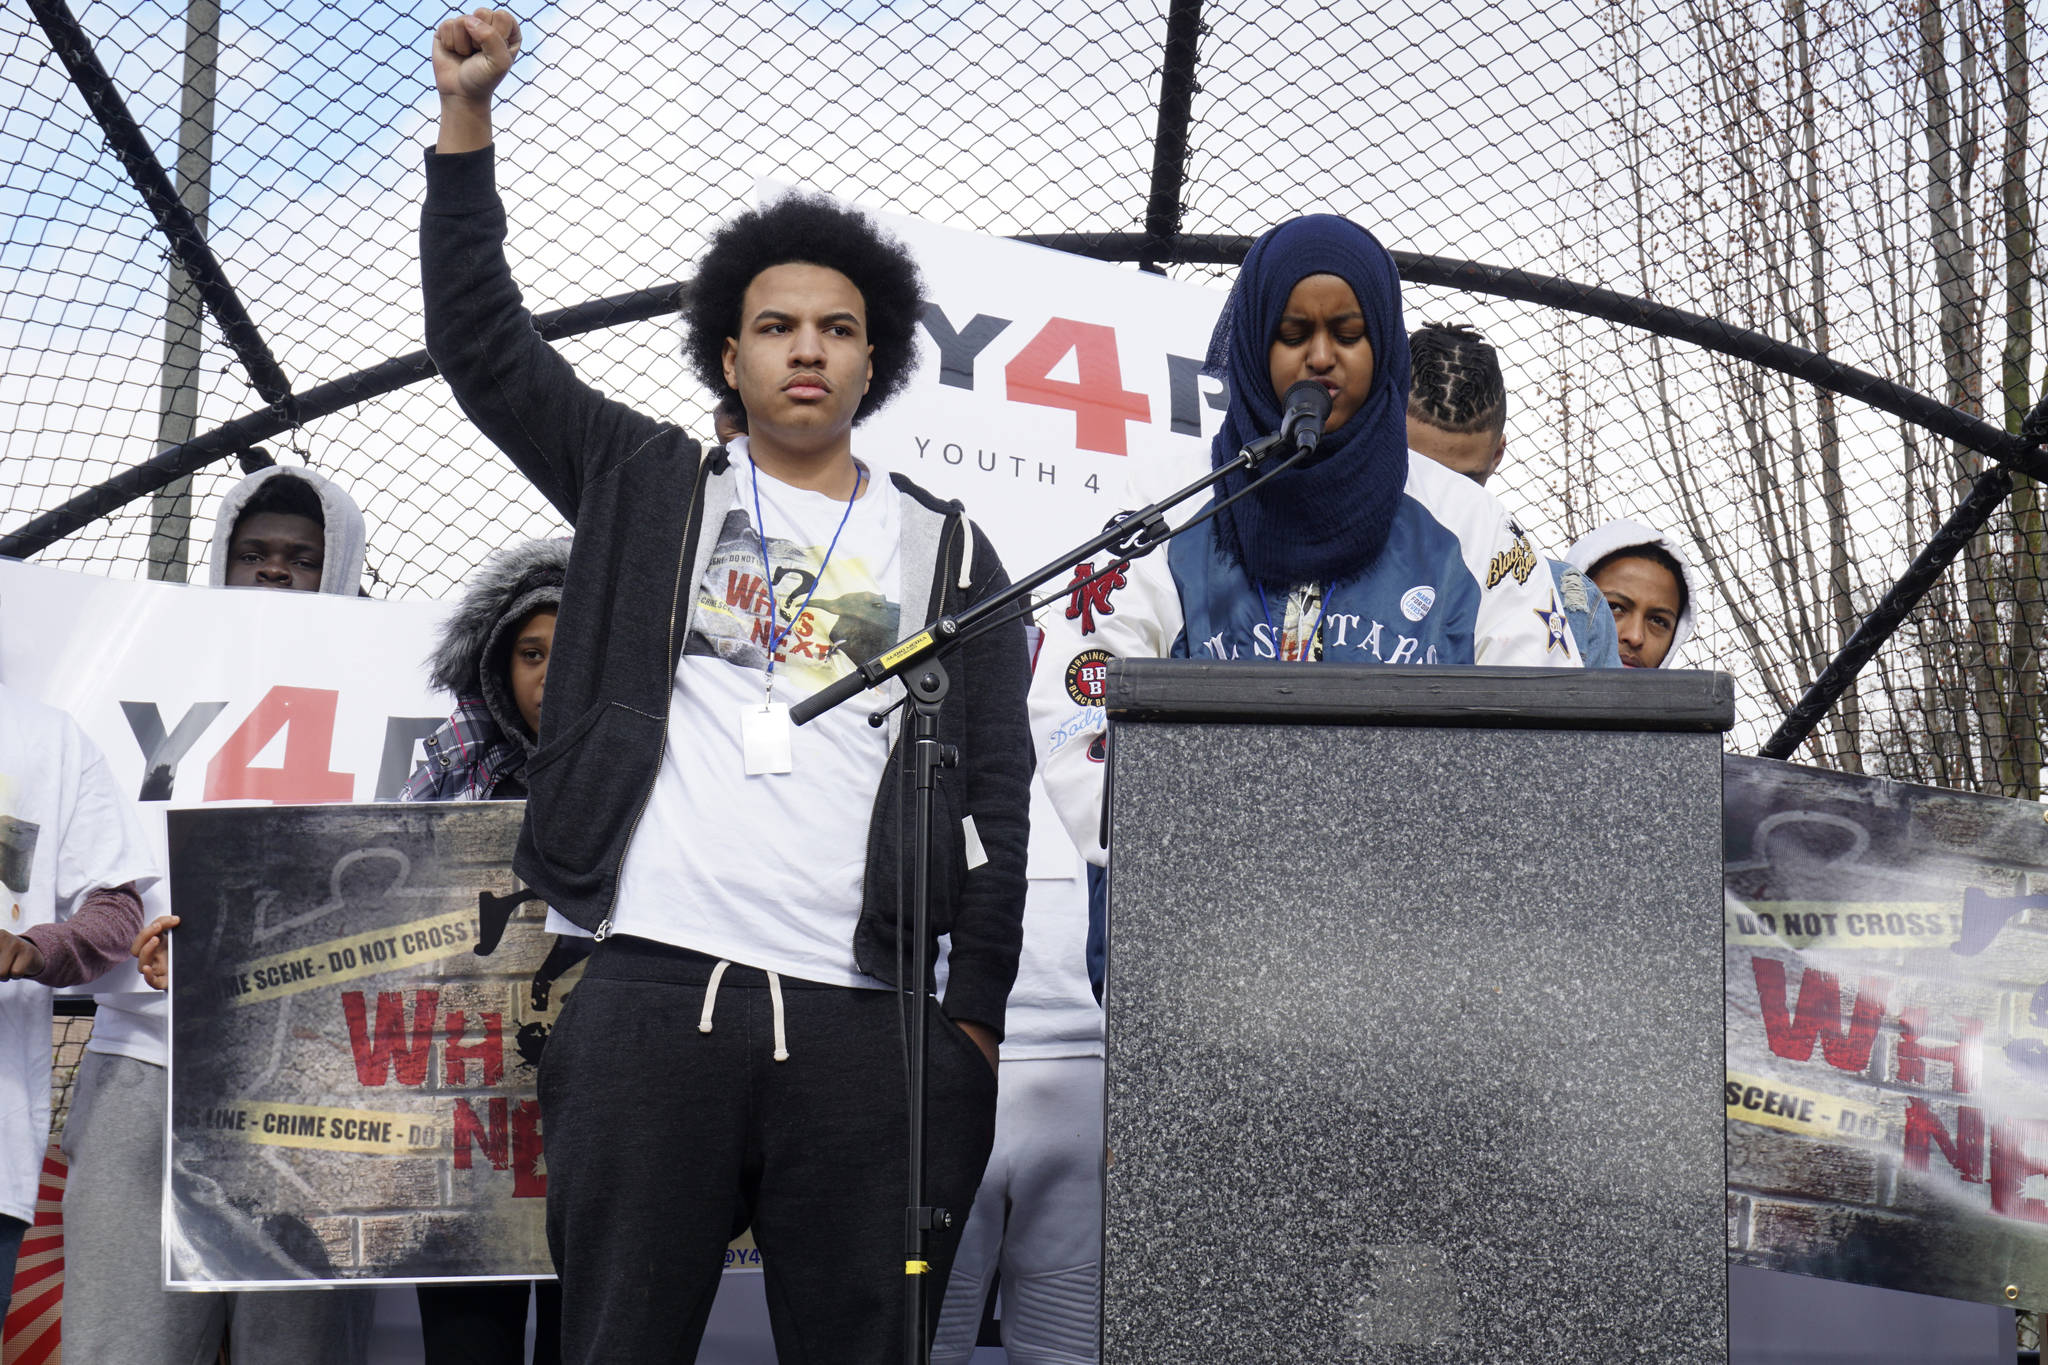 Elijah Lewis (left) from Youth 4 Peace shared the names of Seattleites who have died from gun violence. Photo by Melissa Hellmann